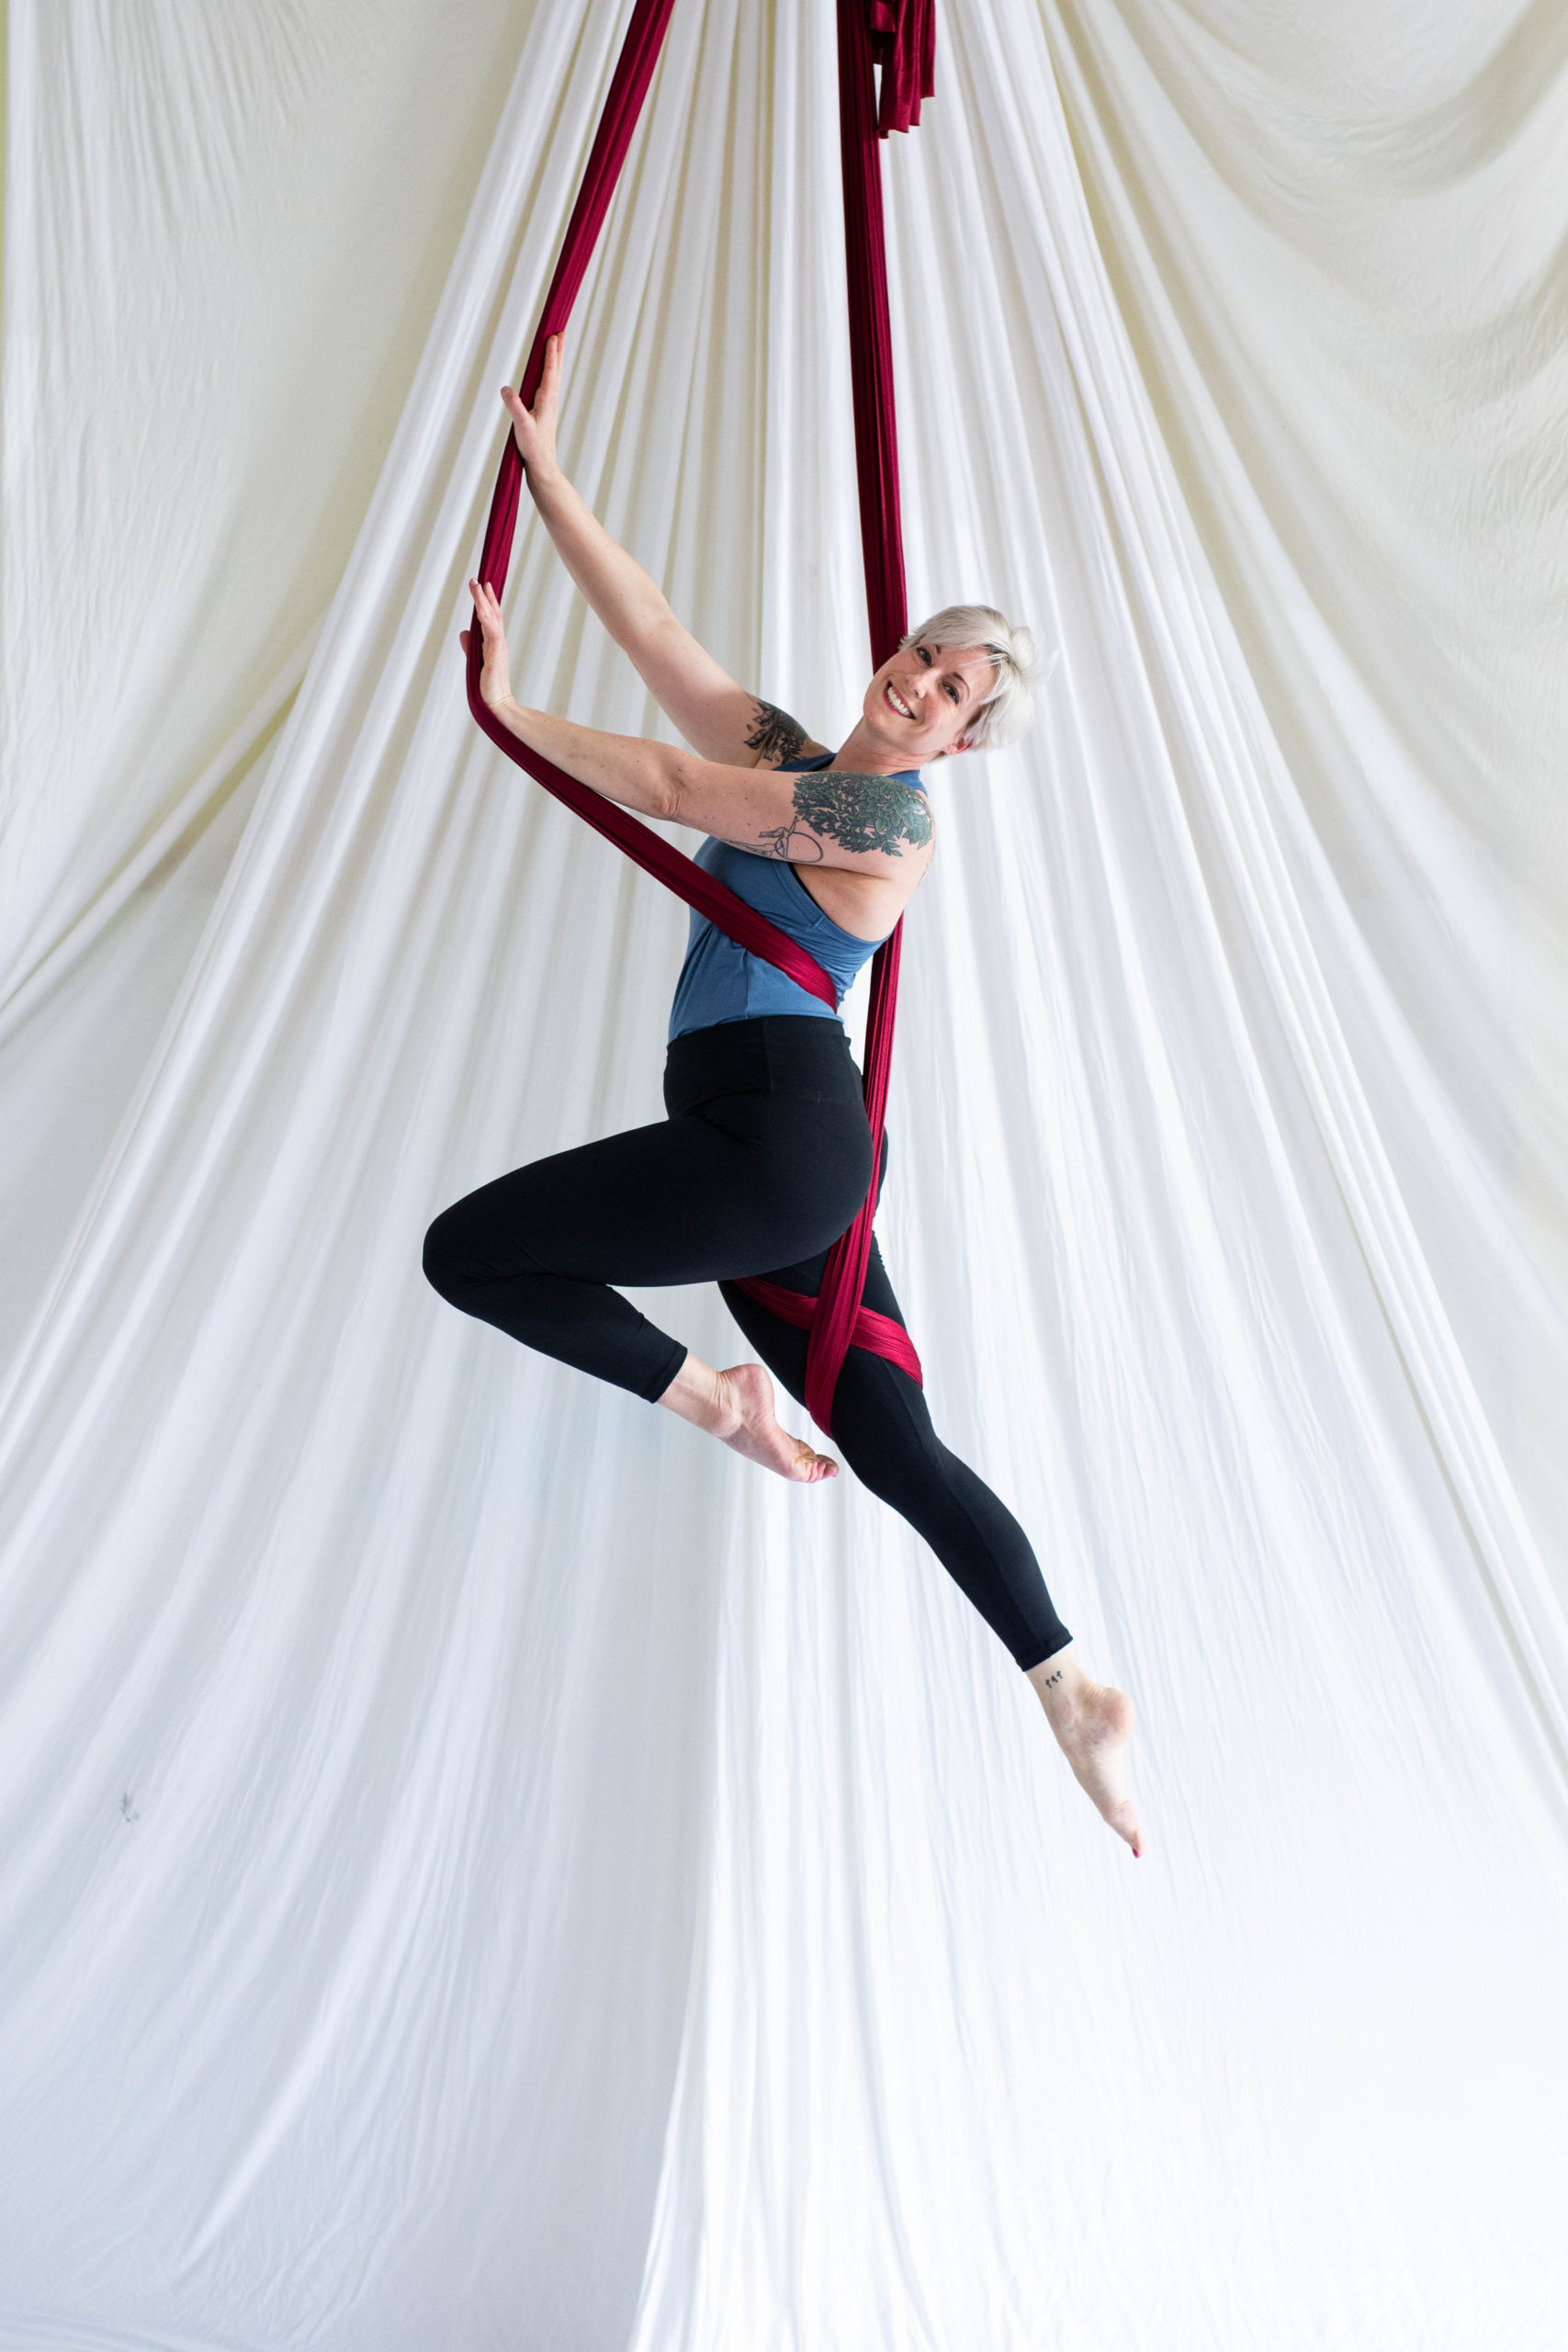 Aerial Silks: A recreational and sports activity performed without safety lines. 1710x2560 HD Wallpaper.